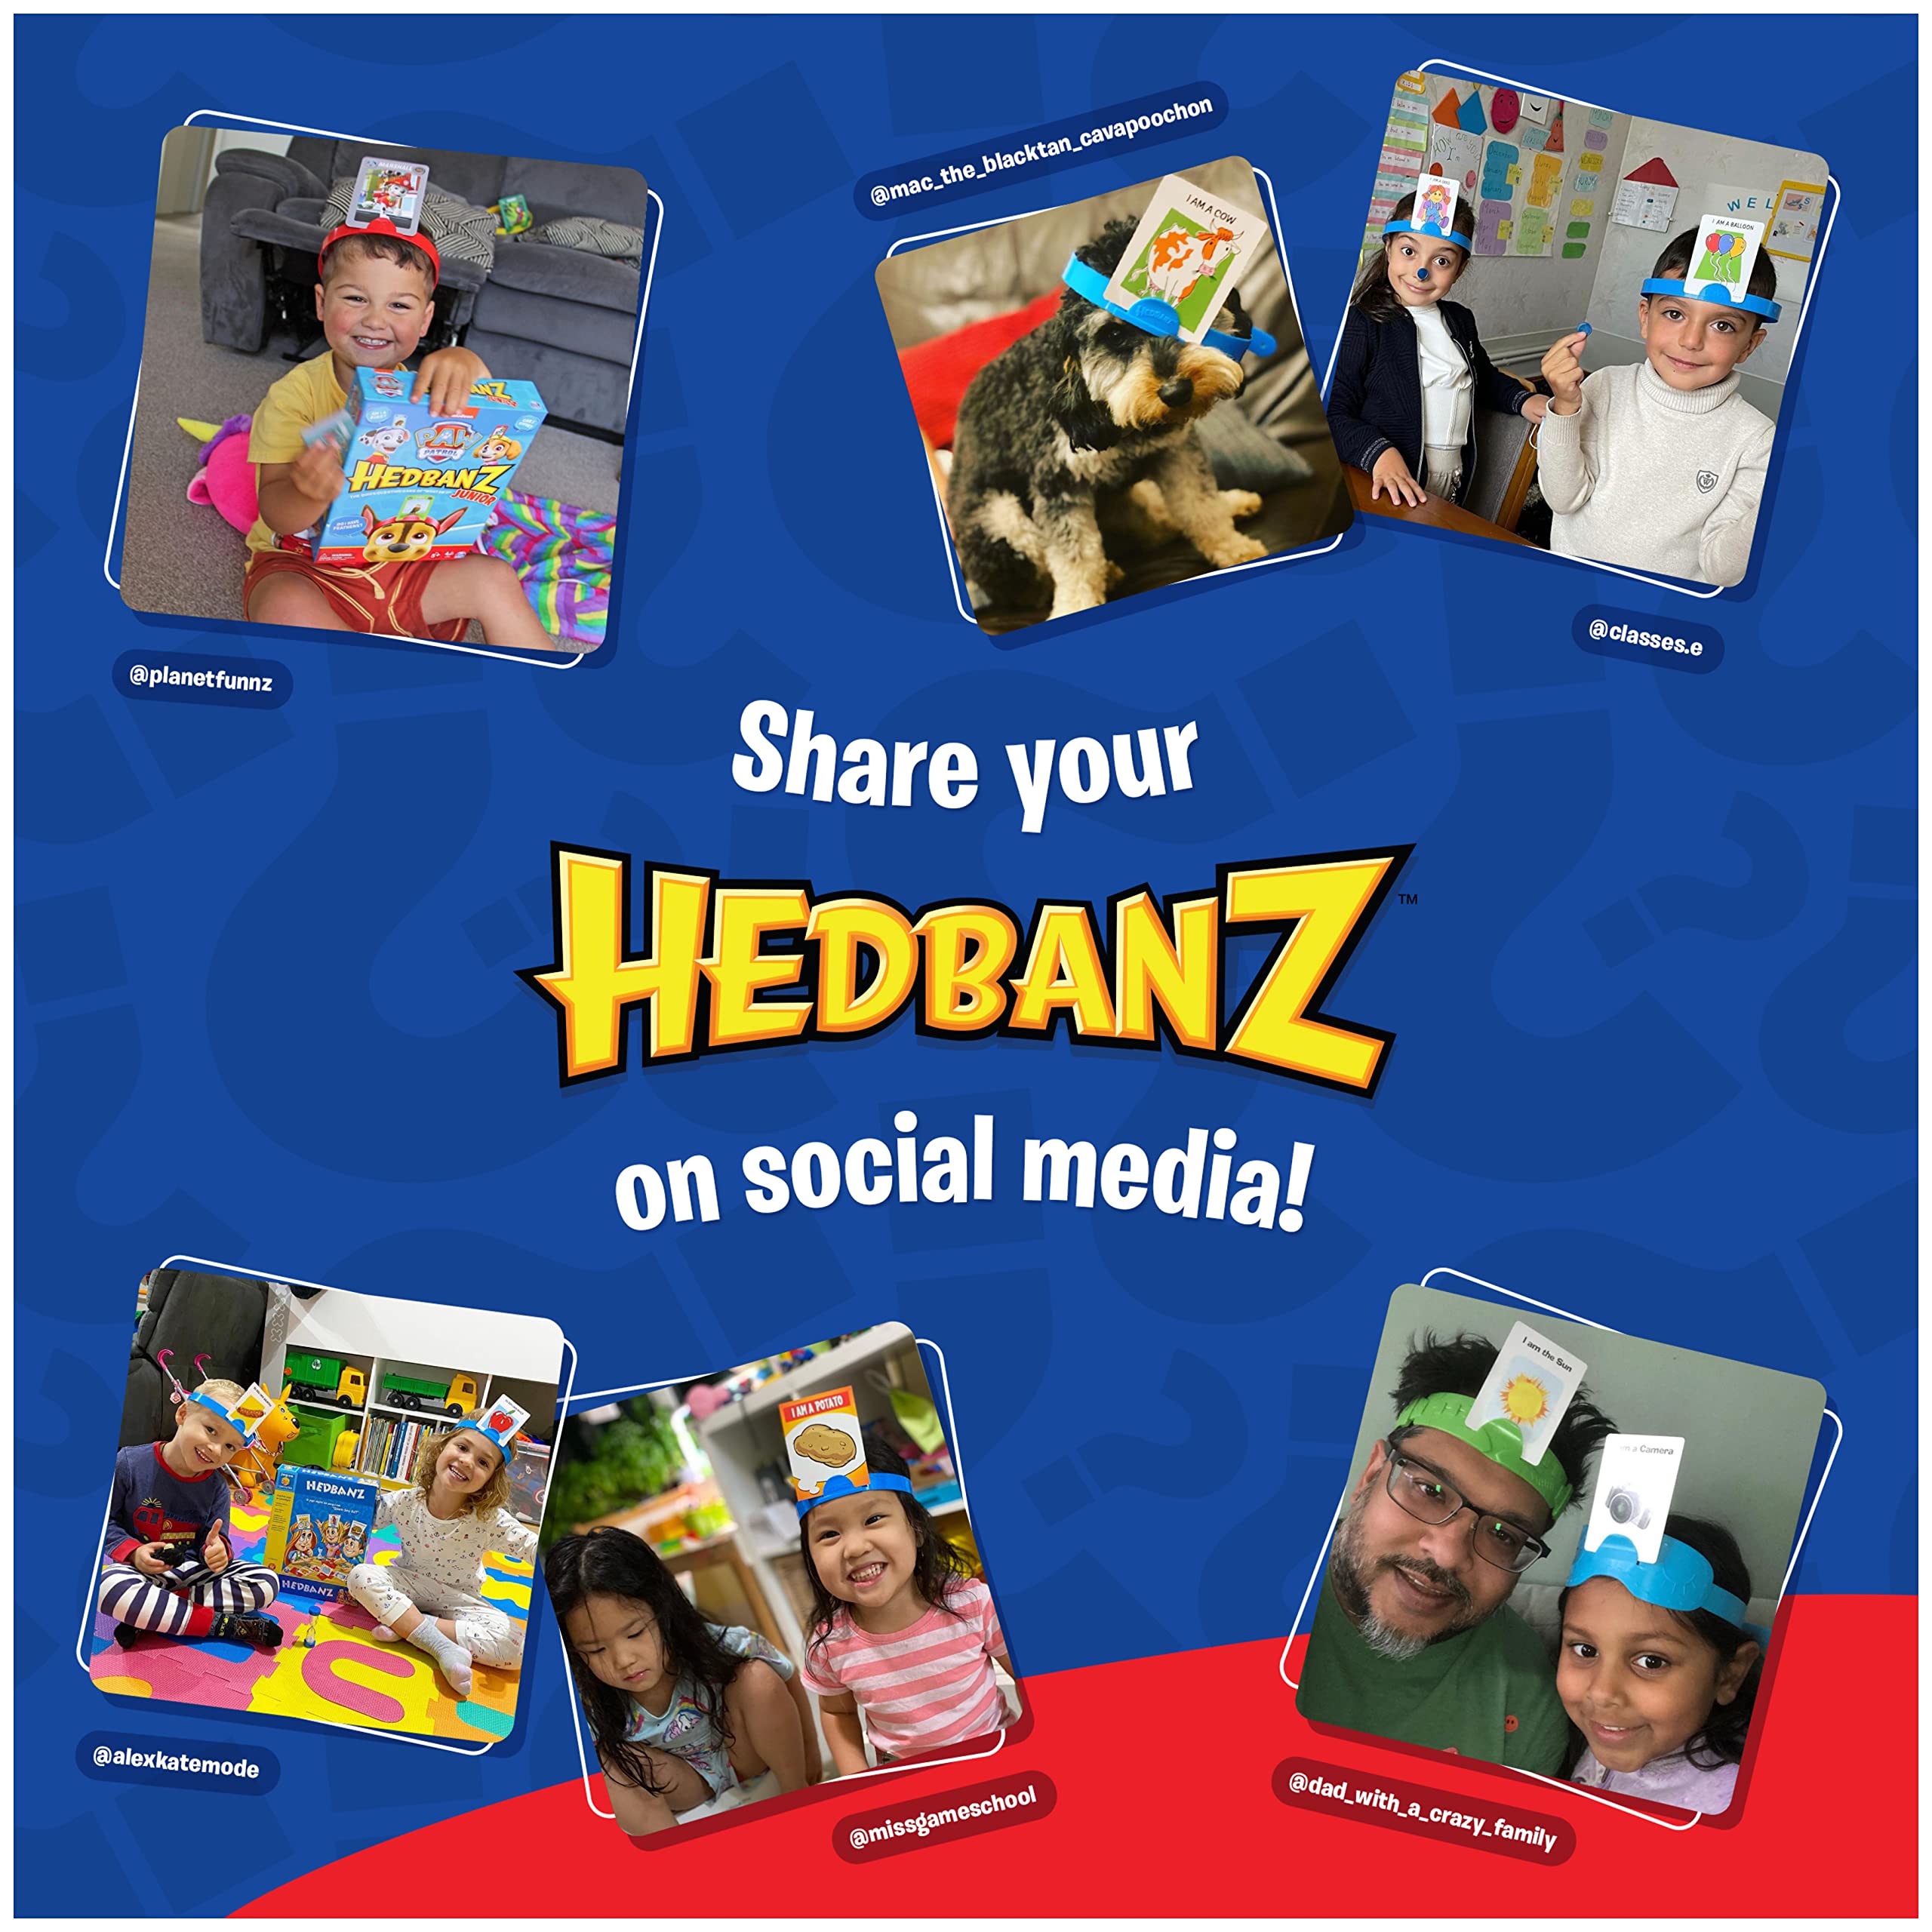 Hedbanz, Quick Question Picture Guessing Family Game for Game Night Headbands Board Game, for Adults and Kids Ages 7 and Up (Edition May Vary)